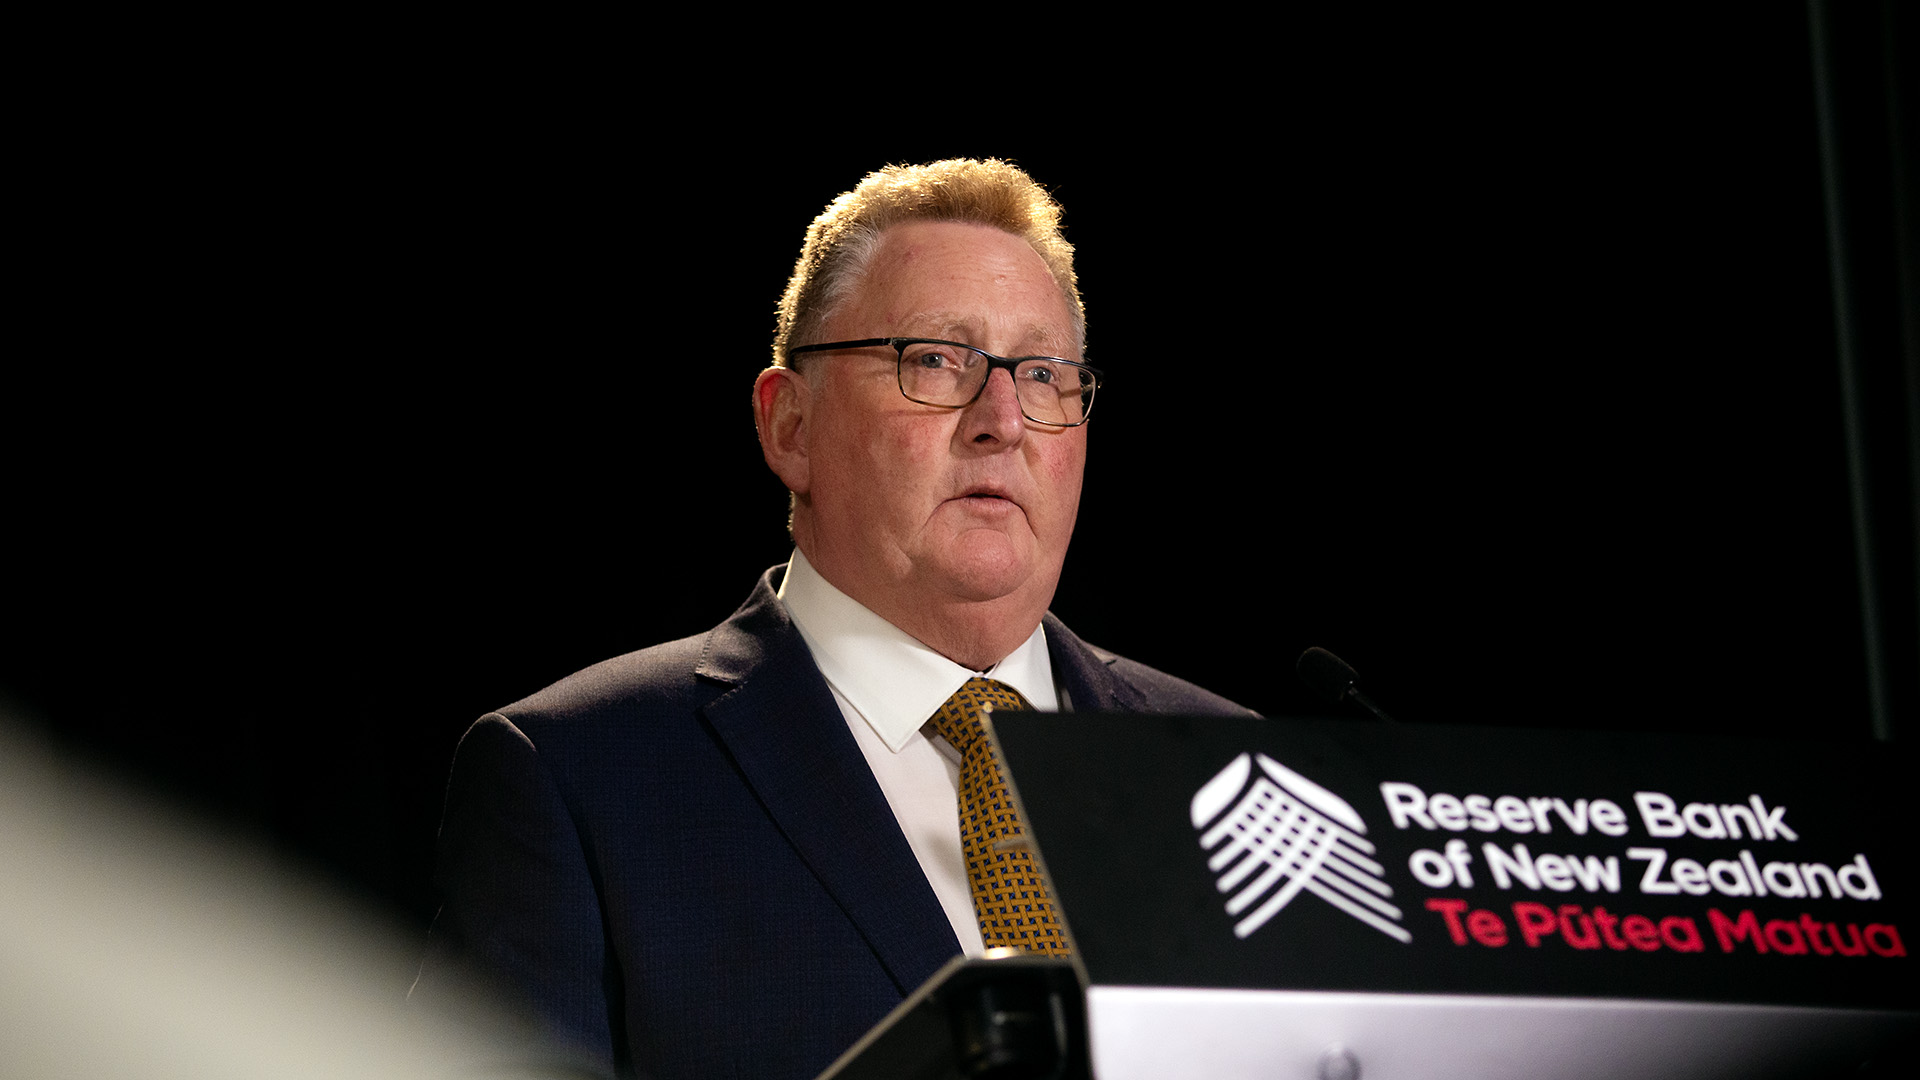 Reserve Bank Governor Adrian Orr speaks at a press conference in February